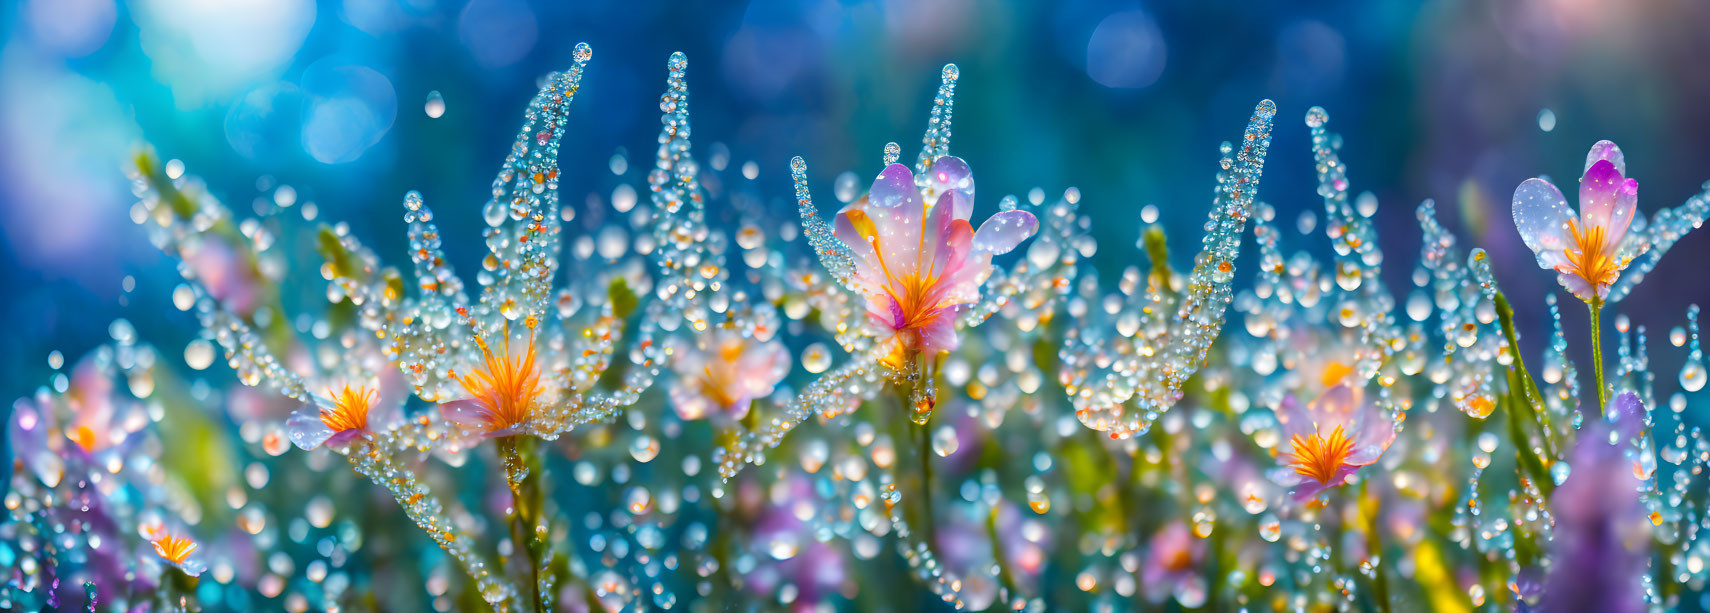 ai, flowers and dew drops in sunlight